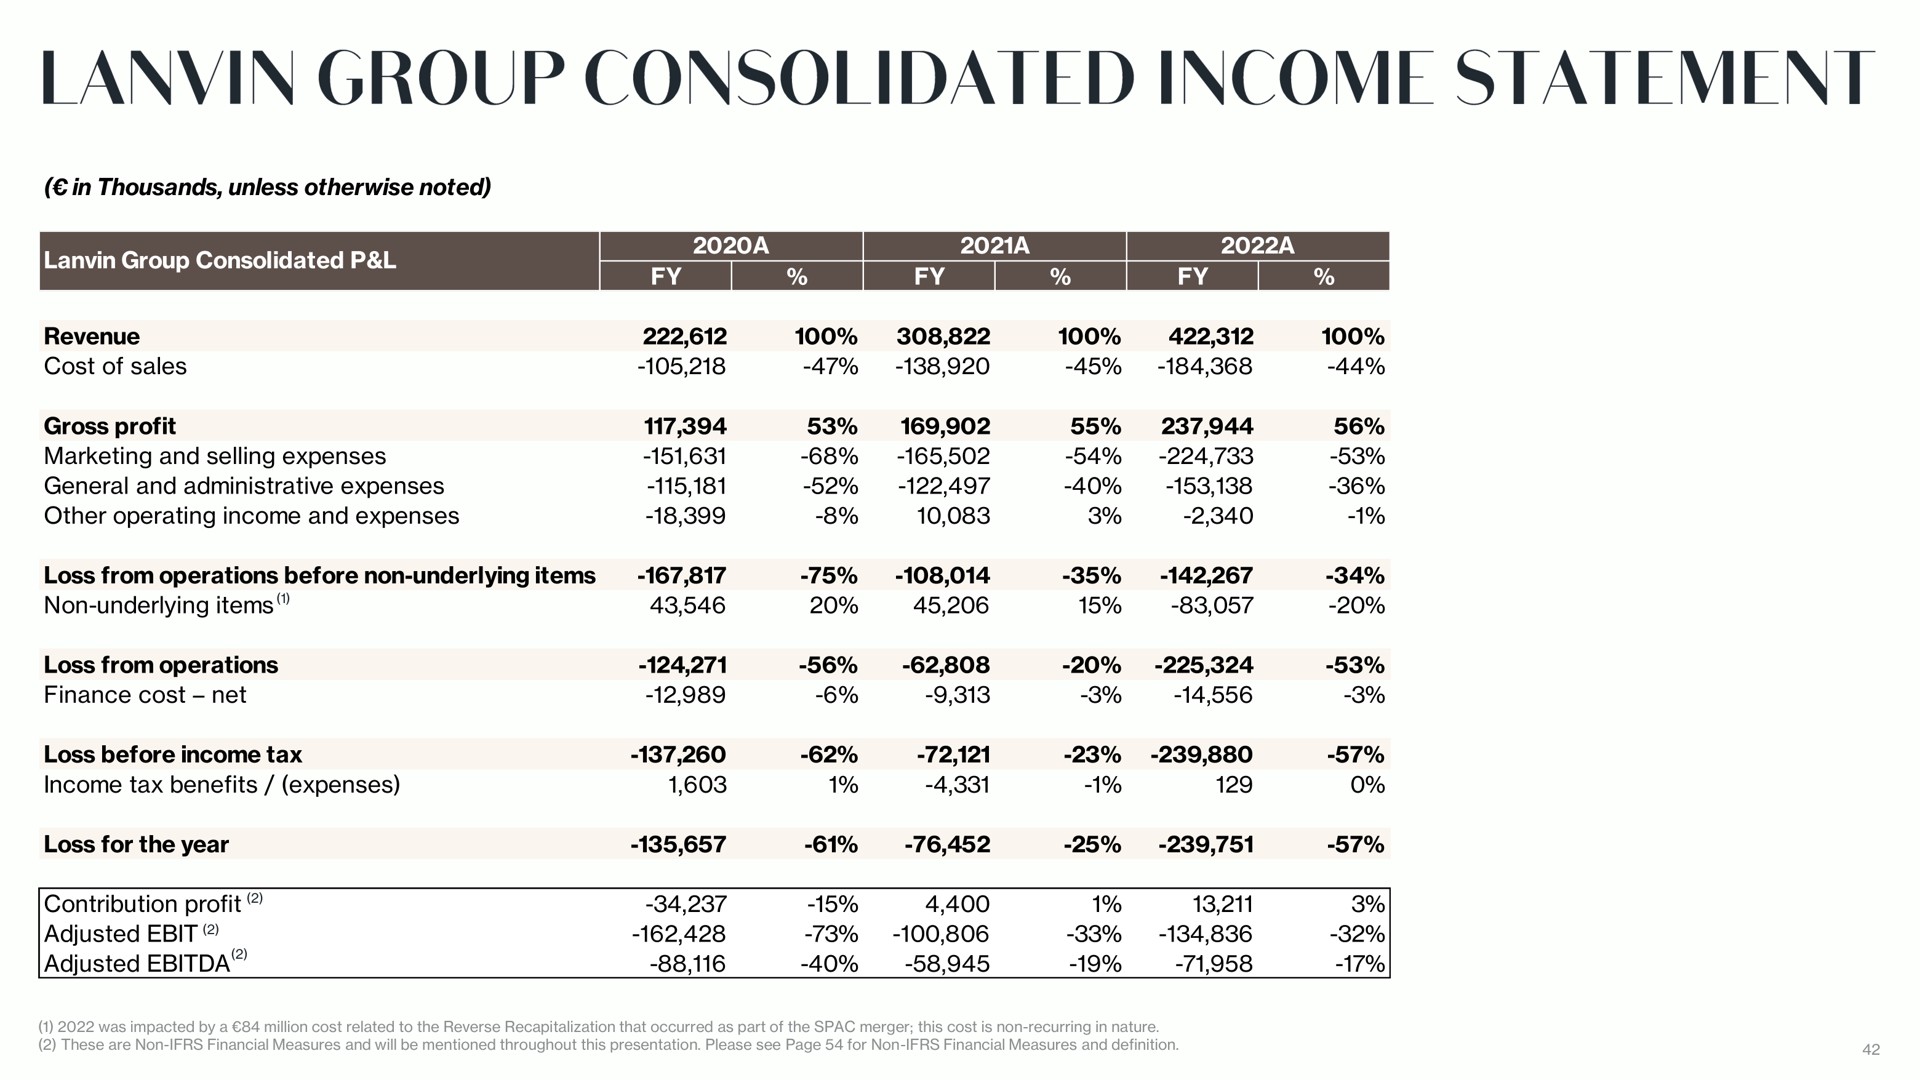 group consolidated income statement | Lanvin